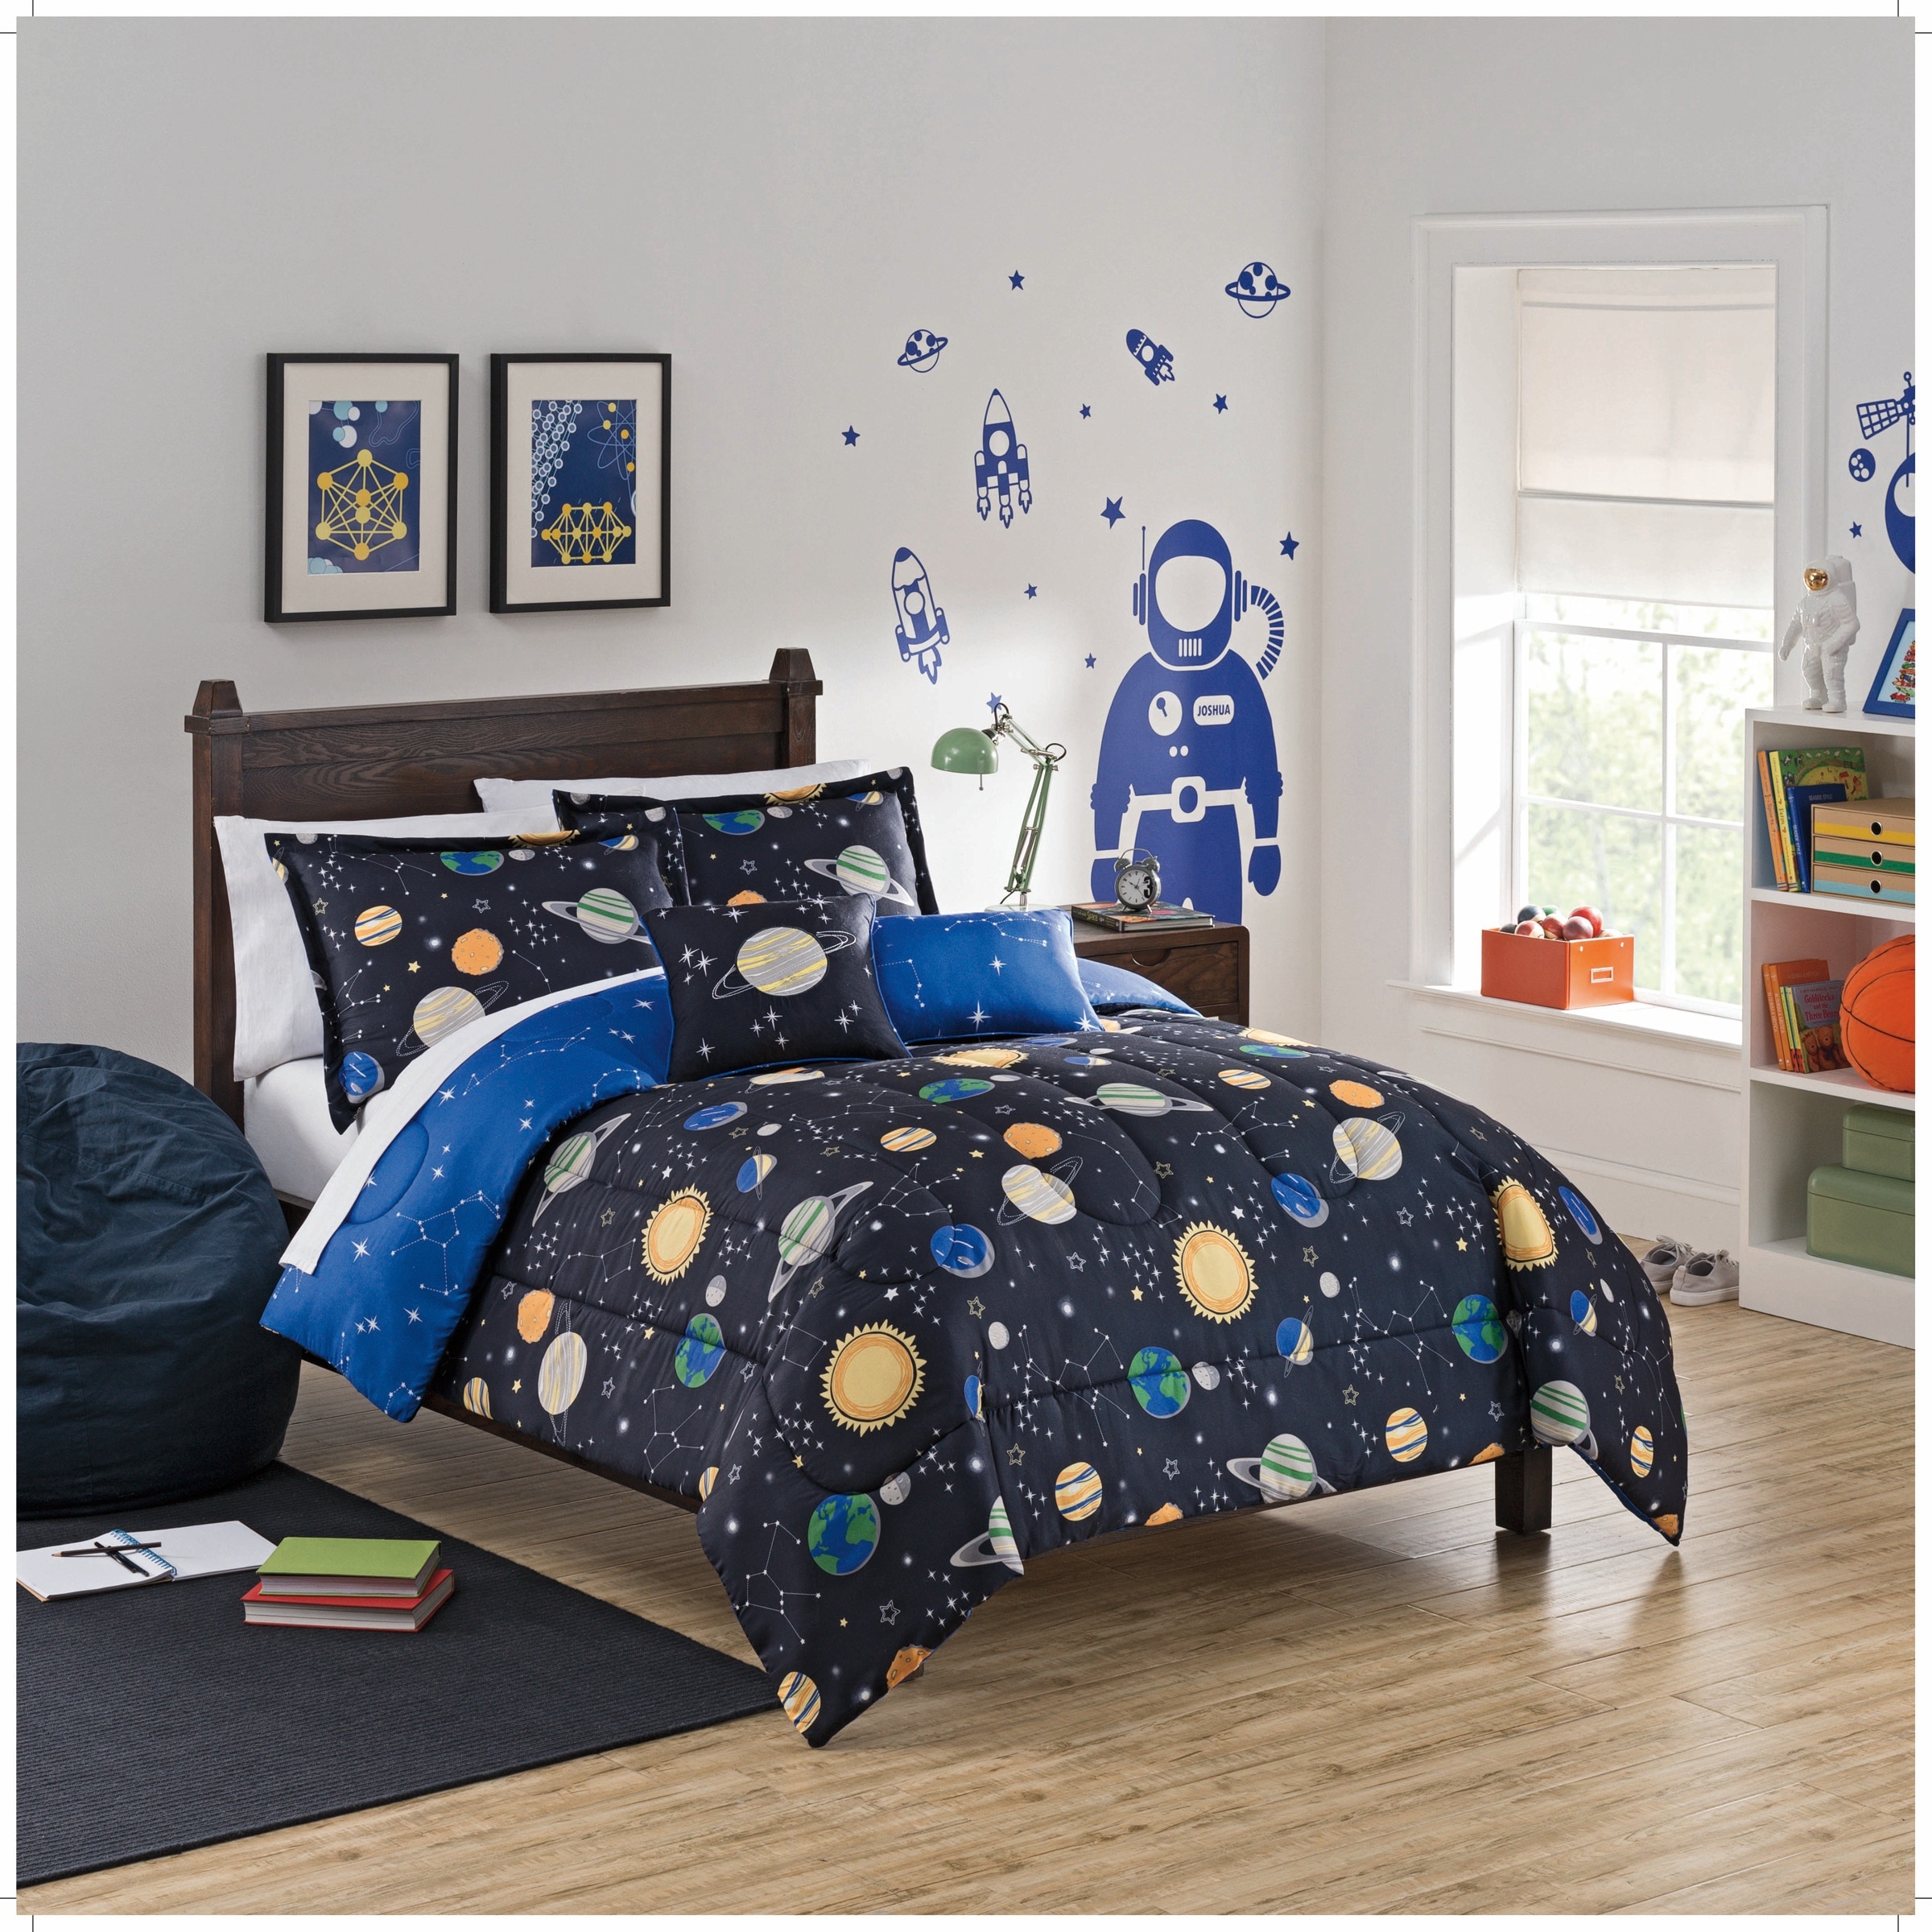 https://ak1.ostkcdn.com/images/products/is/images/direct/b55f8129312e792530f9b0ed47fbd28b9675a5a2/Waverly-Kids-Space-Adventure-Reversible-Bedding-Collection.jpg